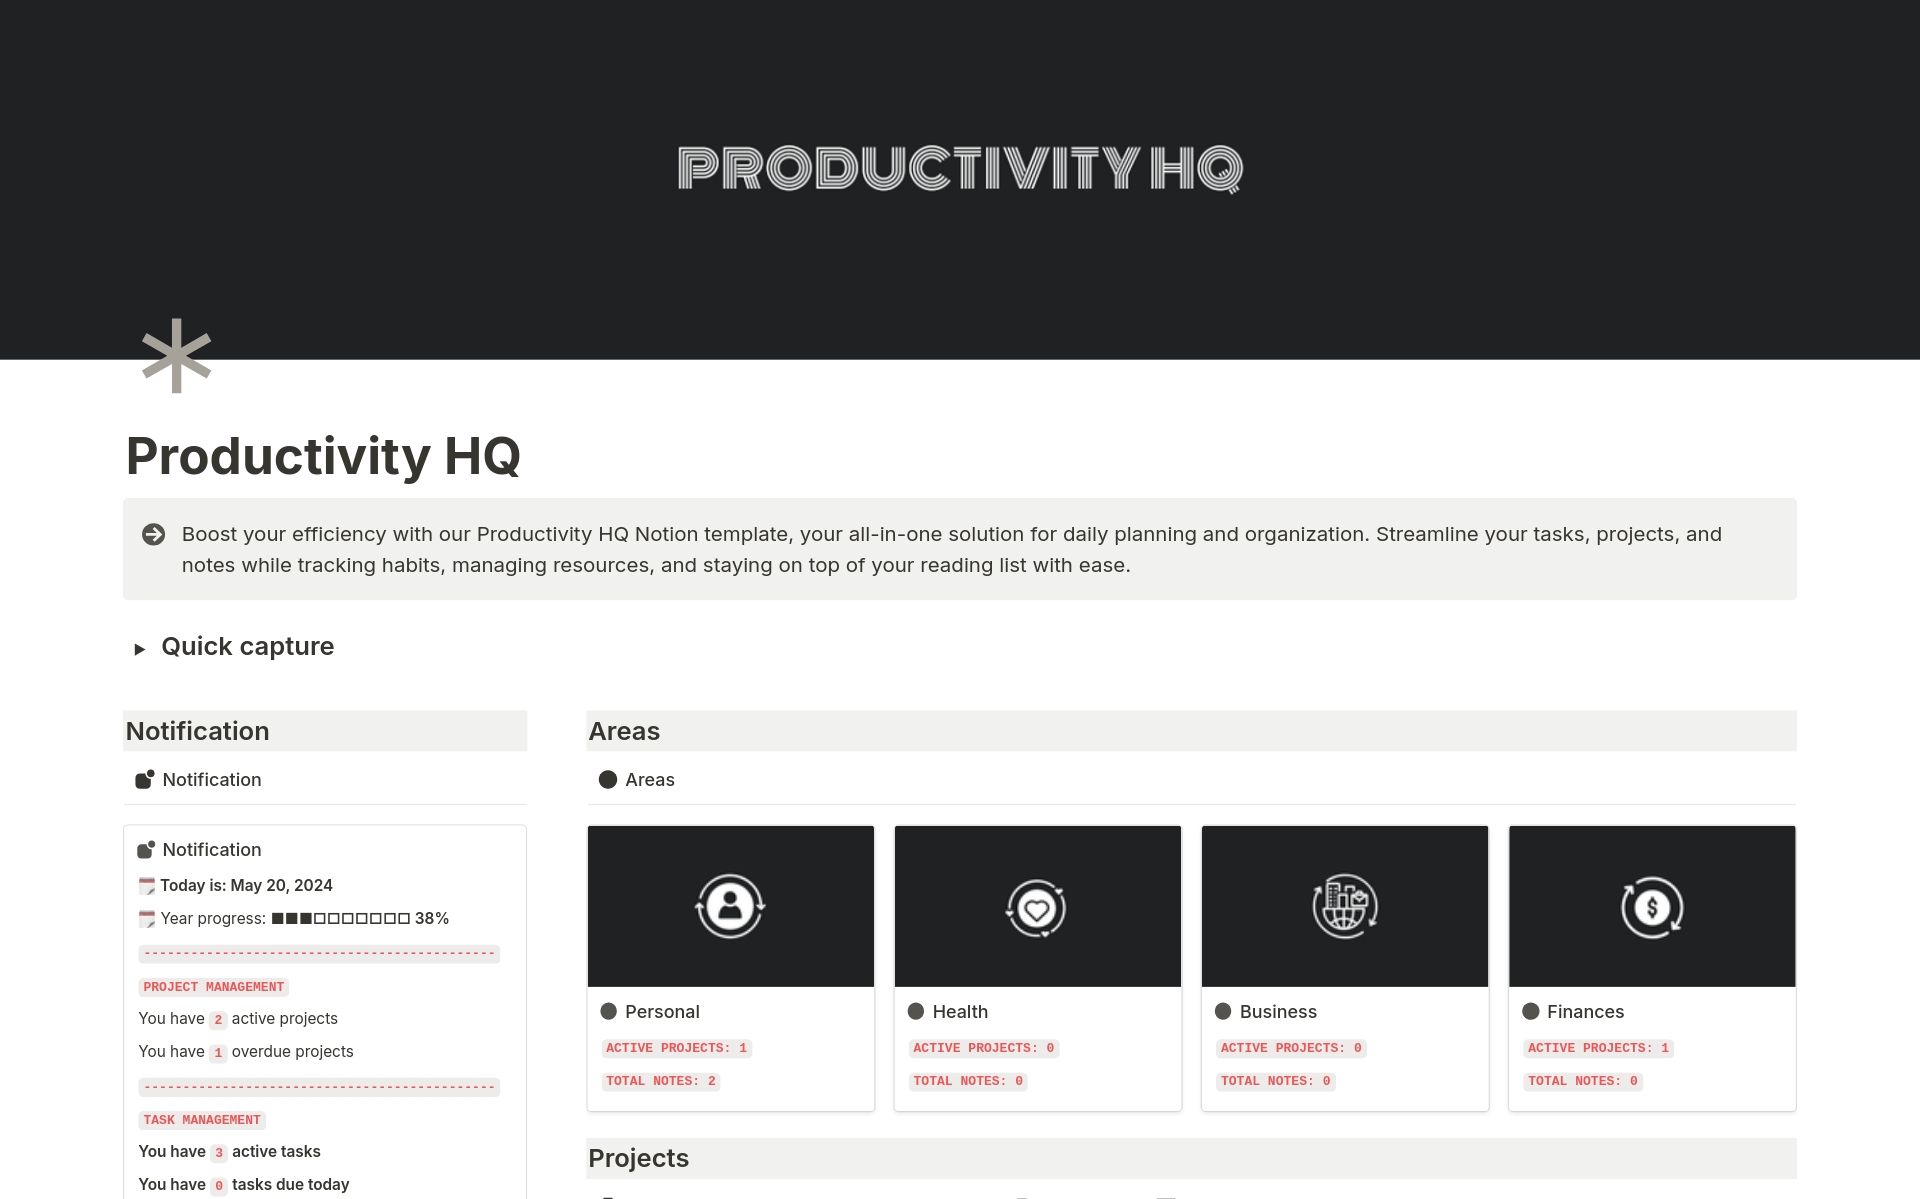 Boost your efficiency with our Productivity HQ Notion template, your all-in-one solution for daily planning and organization. Streamline your tasks, projects, and notes while tracking habits, managing resources, and staying on top of your reading list with ease.